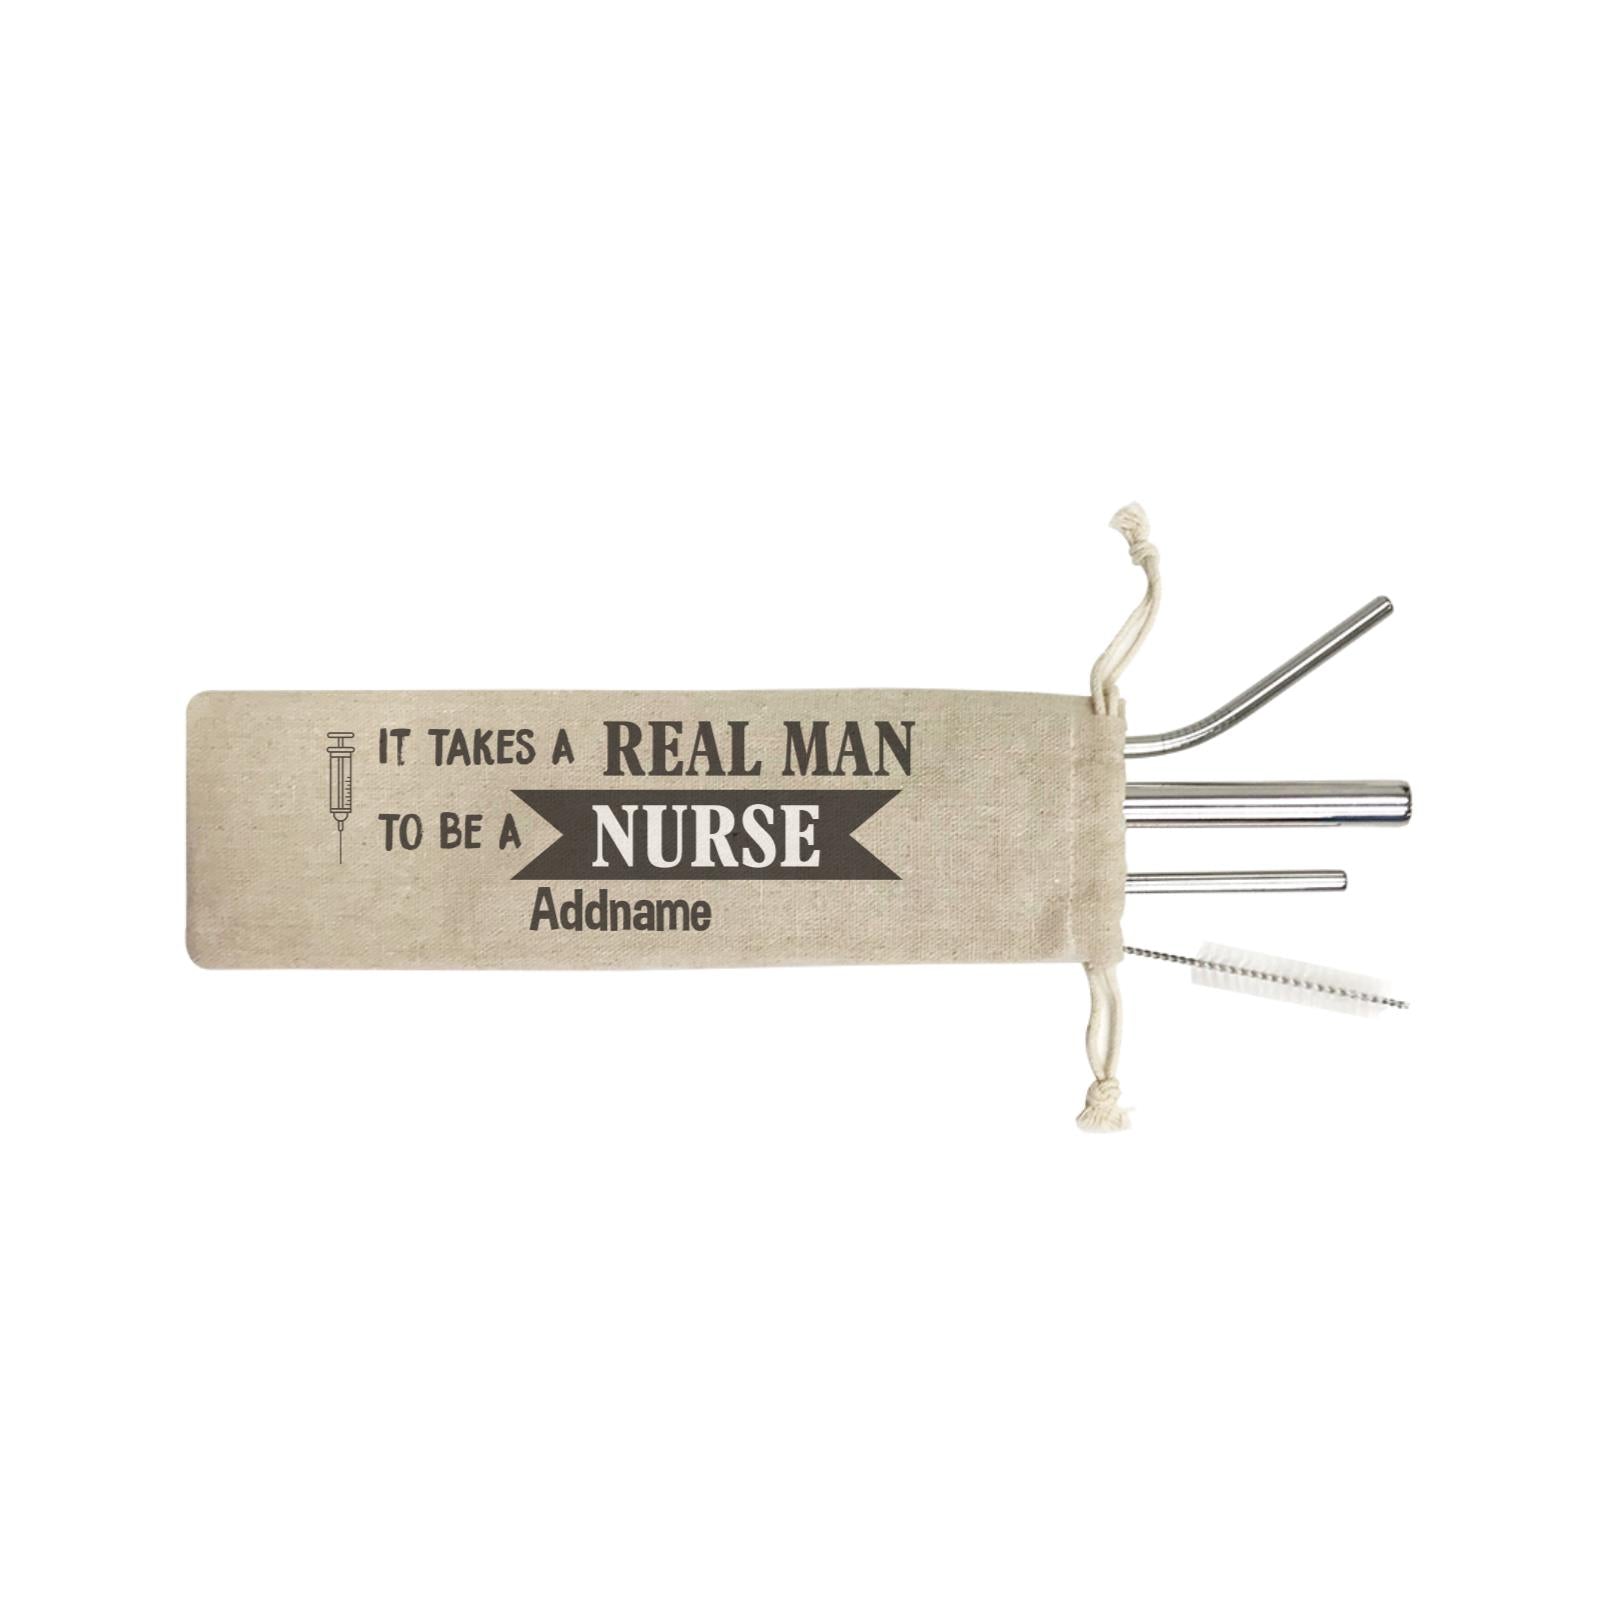 It Takes a Real Man to be a Nurse SB 4-in-1 Stainless Steel Straw Set In a Satchel